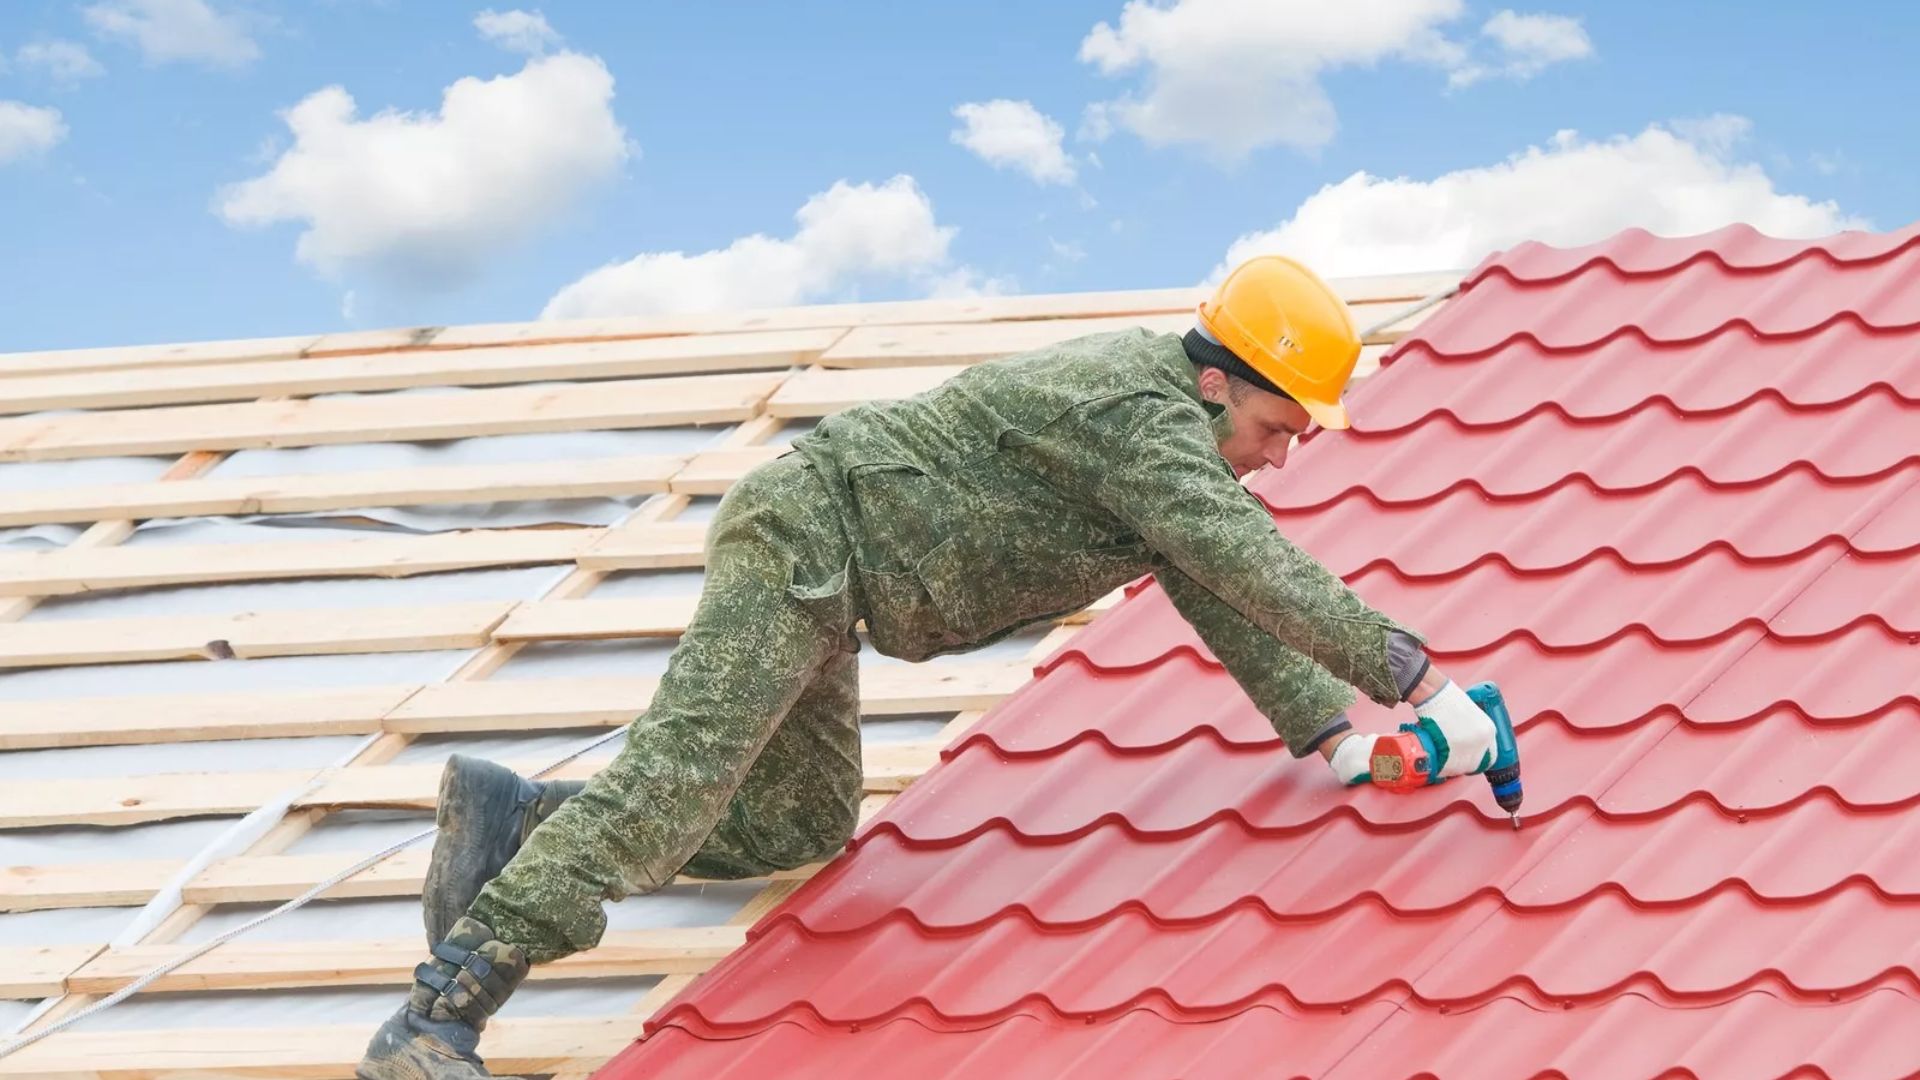 The Science Behind Roofing Materials: What Works Best in the UAE Climate